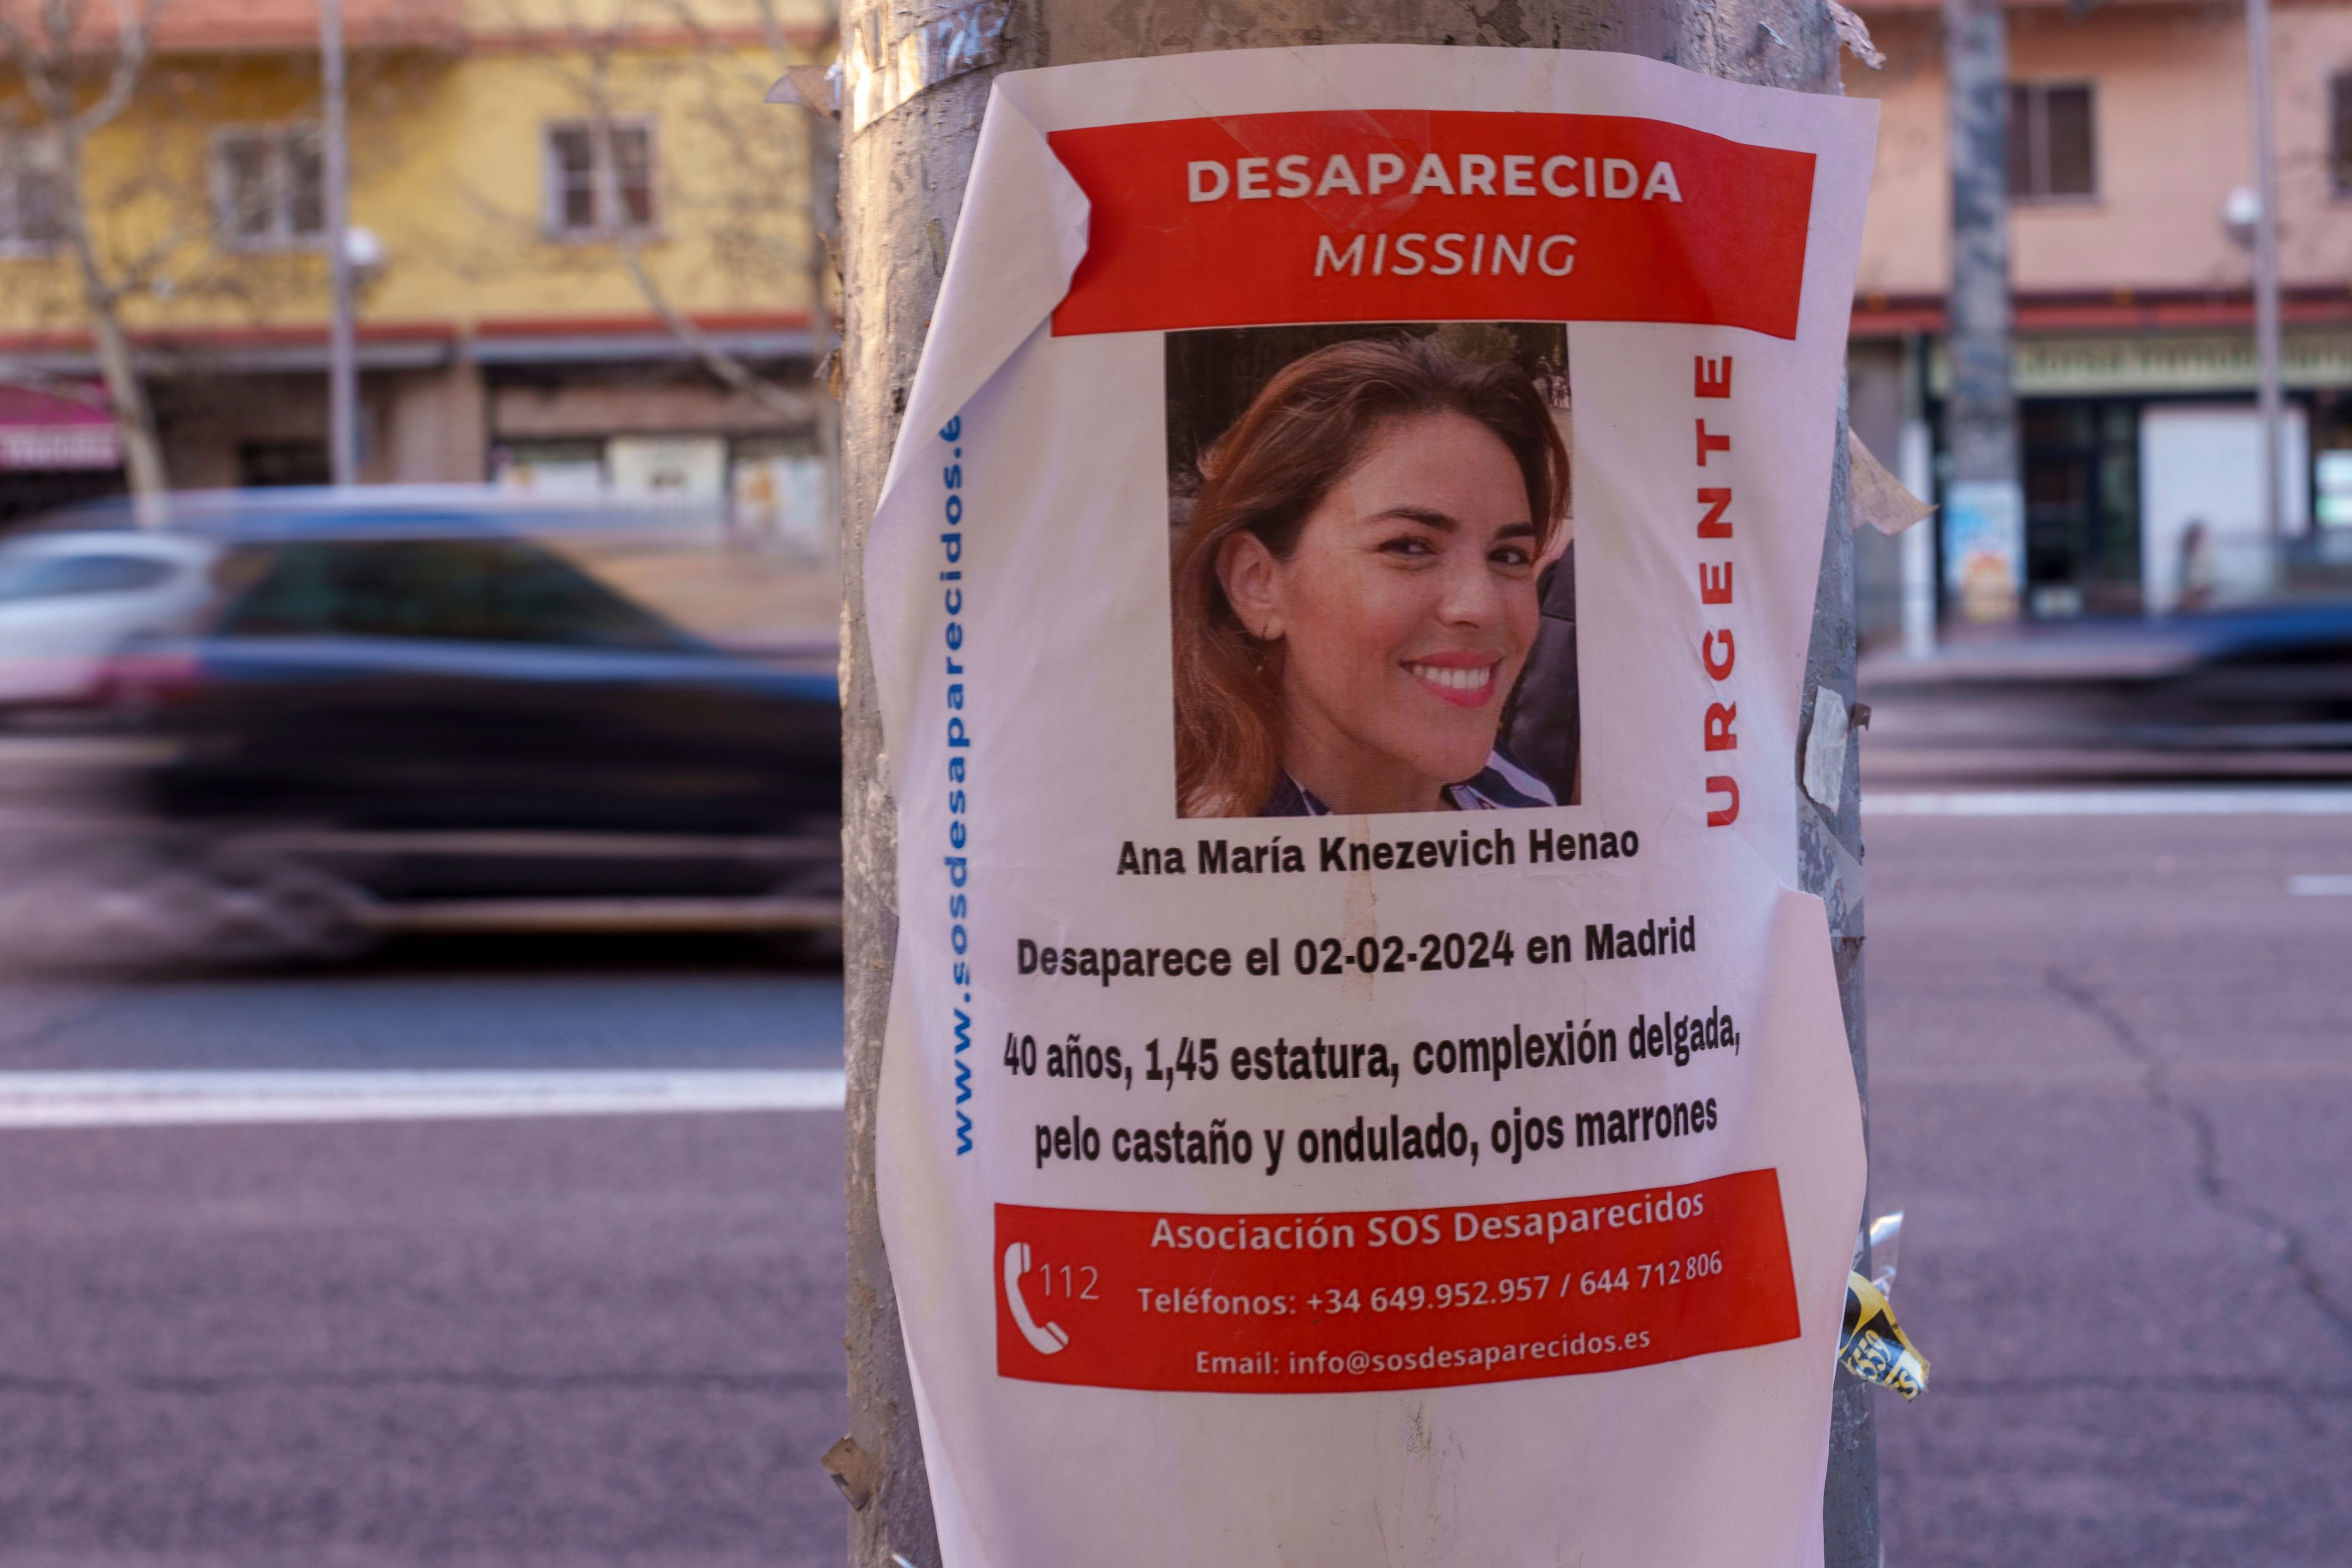 american woman missing in madrid after man seen disabling security cameras